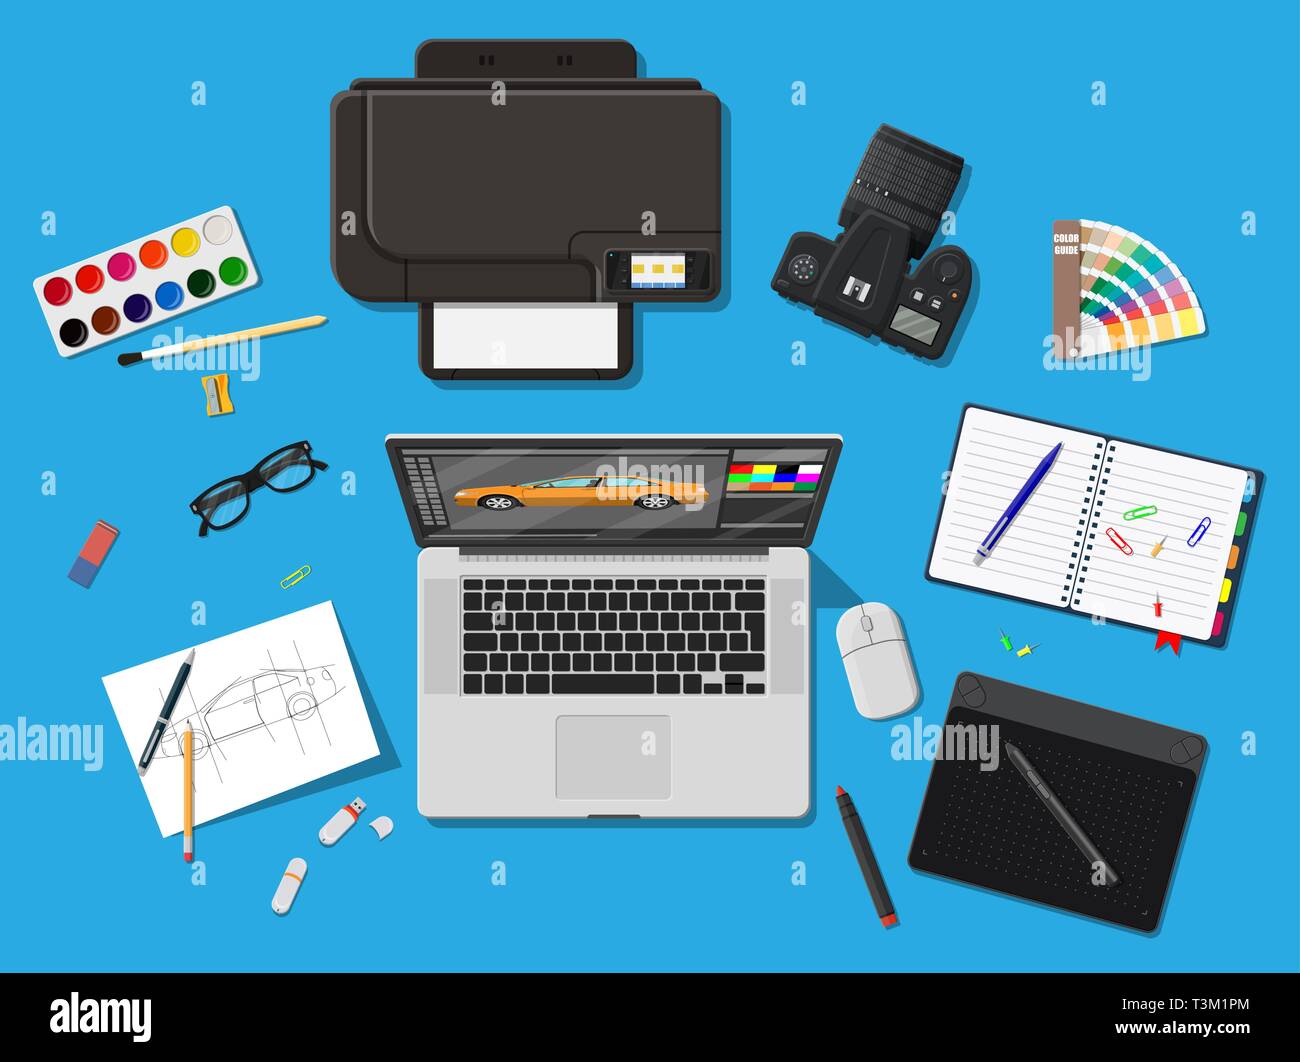 Designer Workplace Illustrator Desktop With Tools Laptop Pc Photo Camera Mouse Glasses Notes Pen Printer Sketch On Paper Blank And Graphic Ta Stock Vector Image Art Alamy